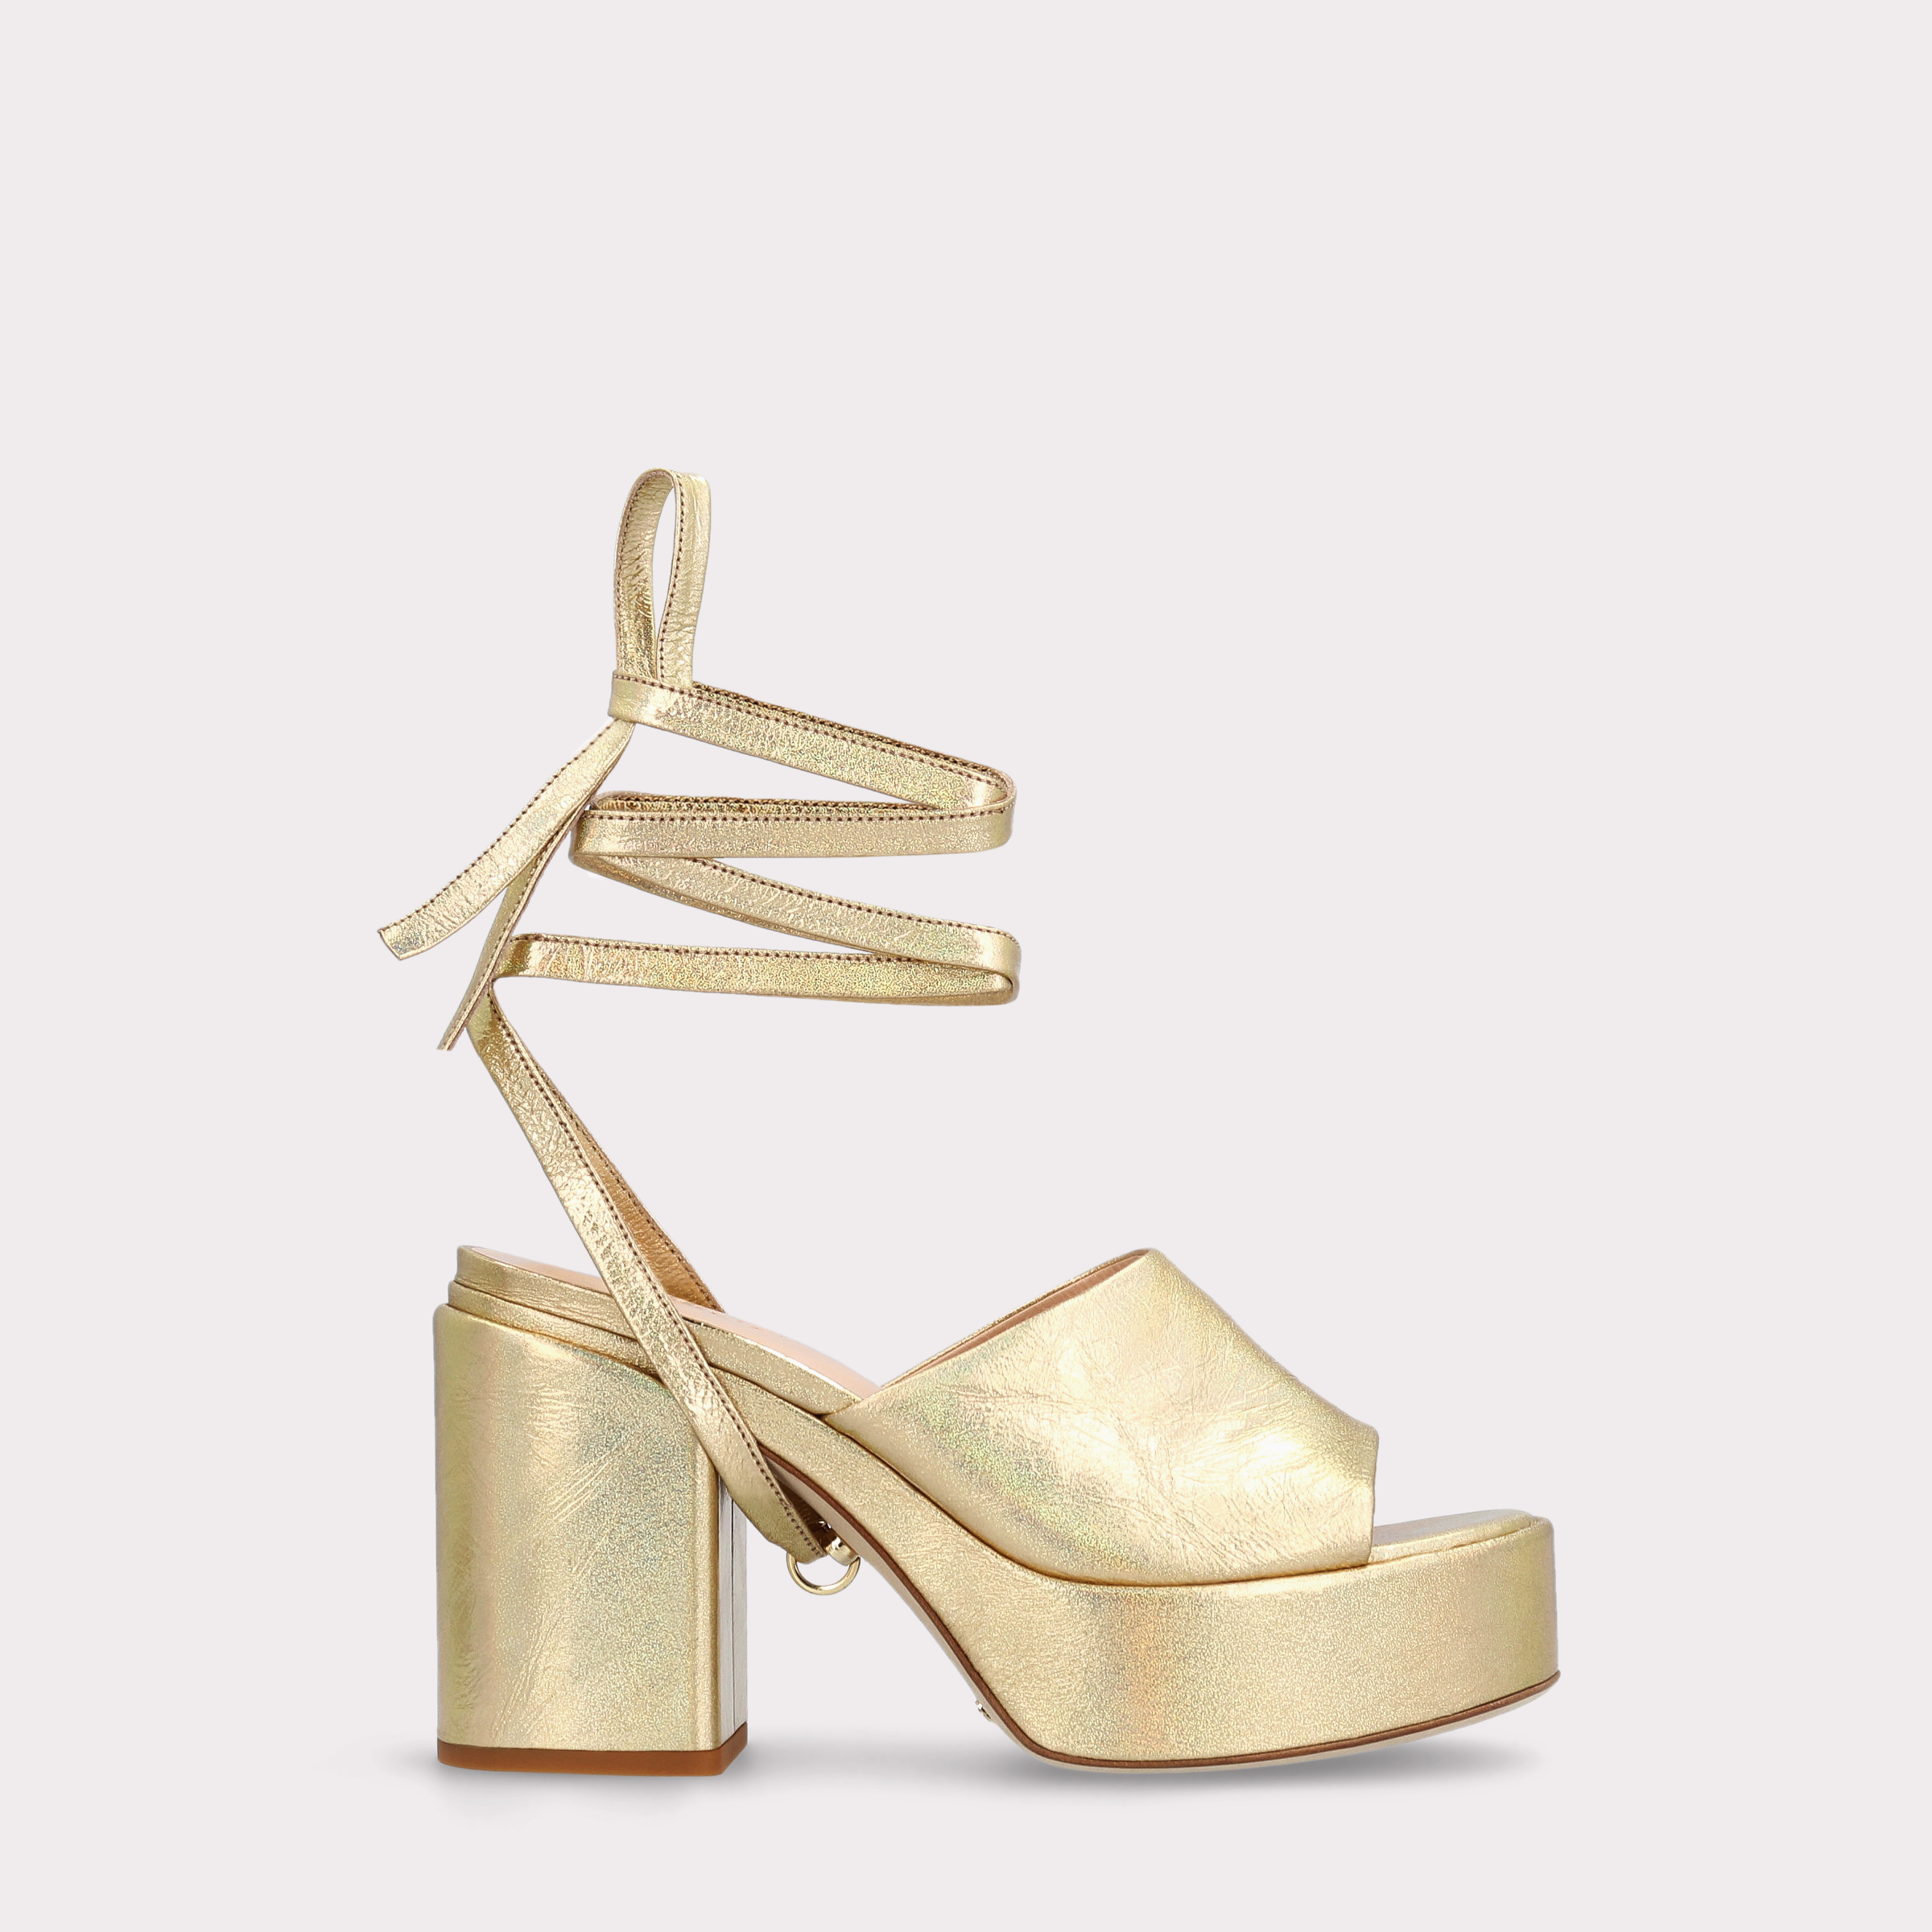 AKAADA 02 GOLD CRUSHED PATENT LEATHER SANDALS